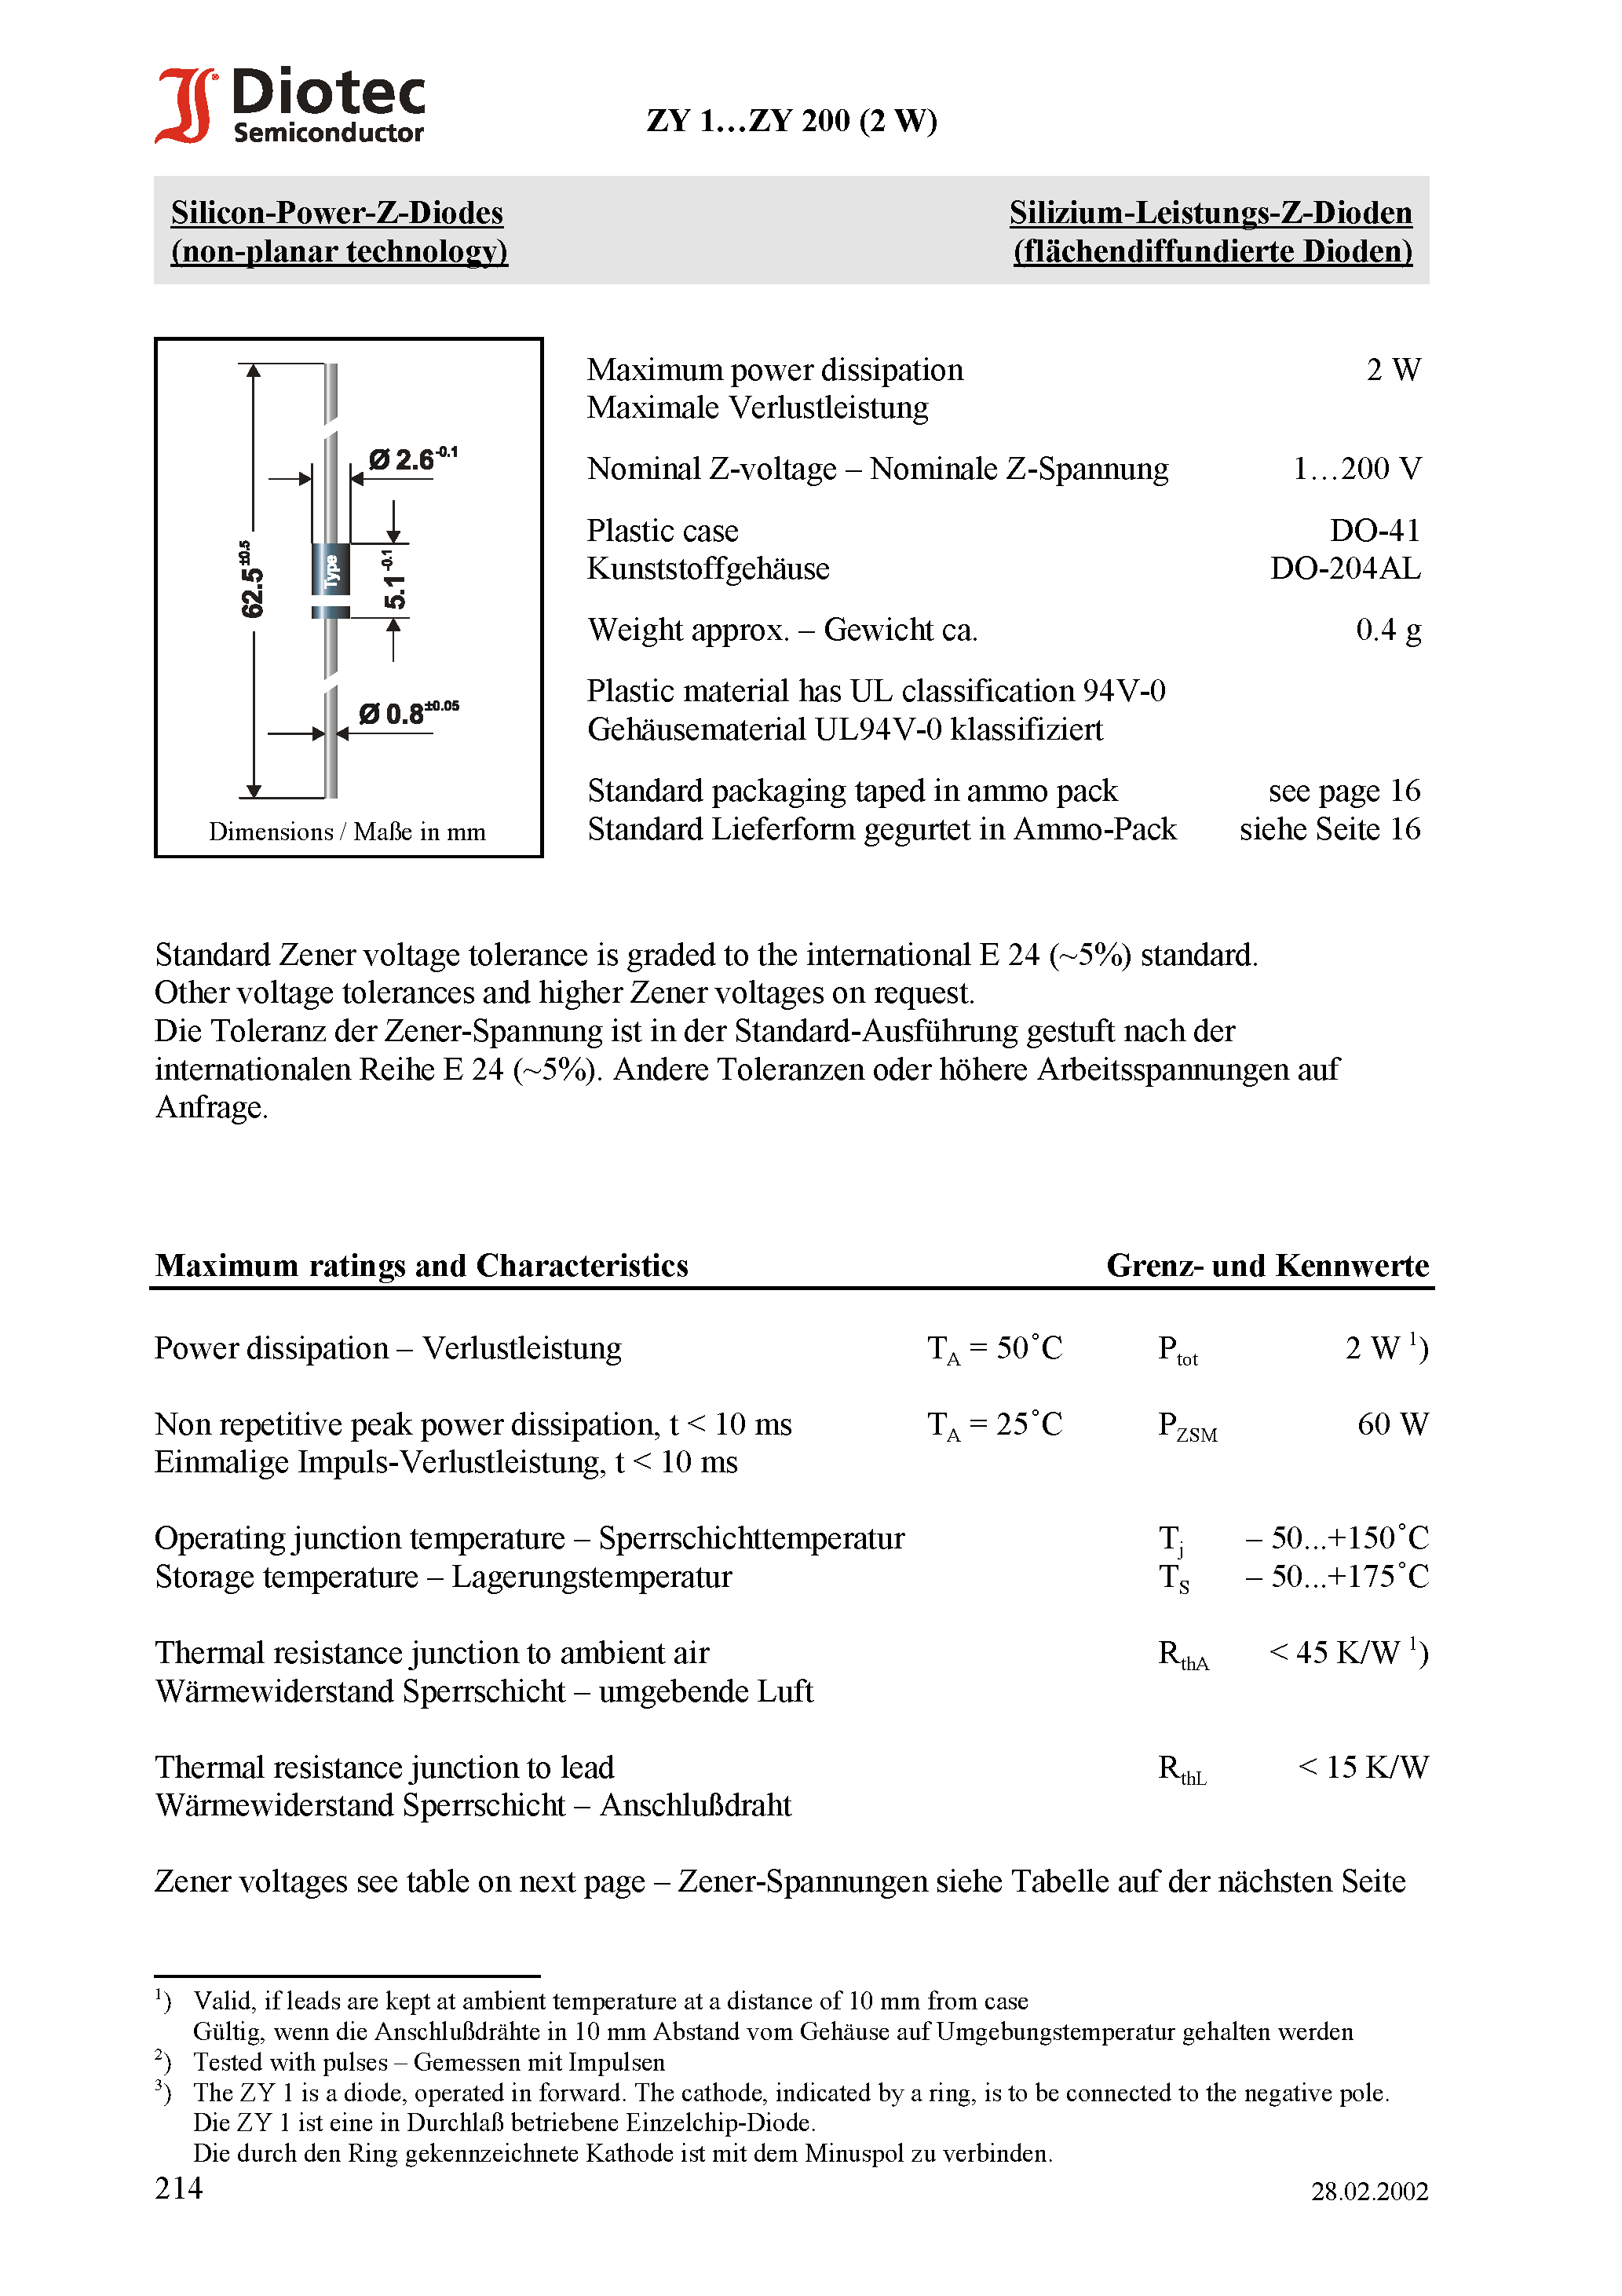 Datasheet ZY5.6 - Silicon-Power-Z-Diodes (non-planar technology) page 1